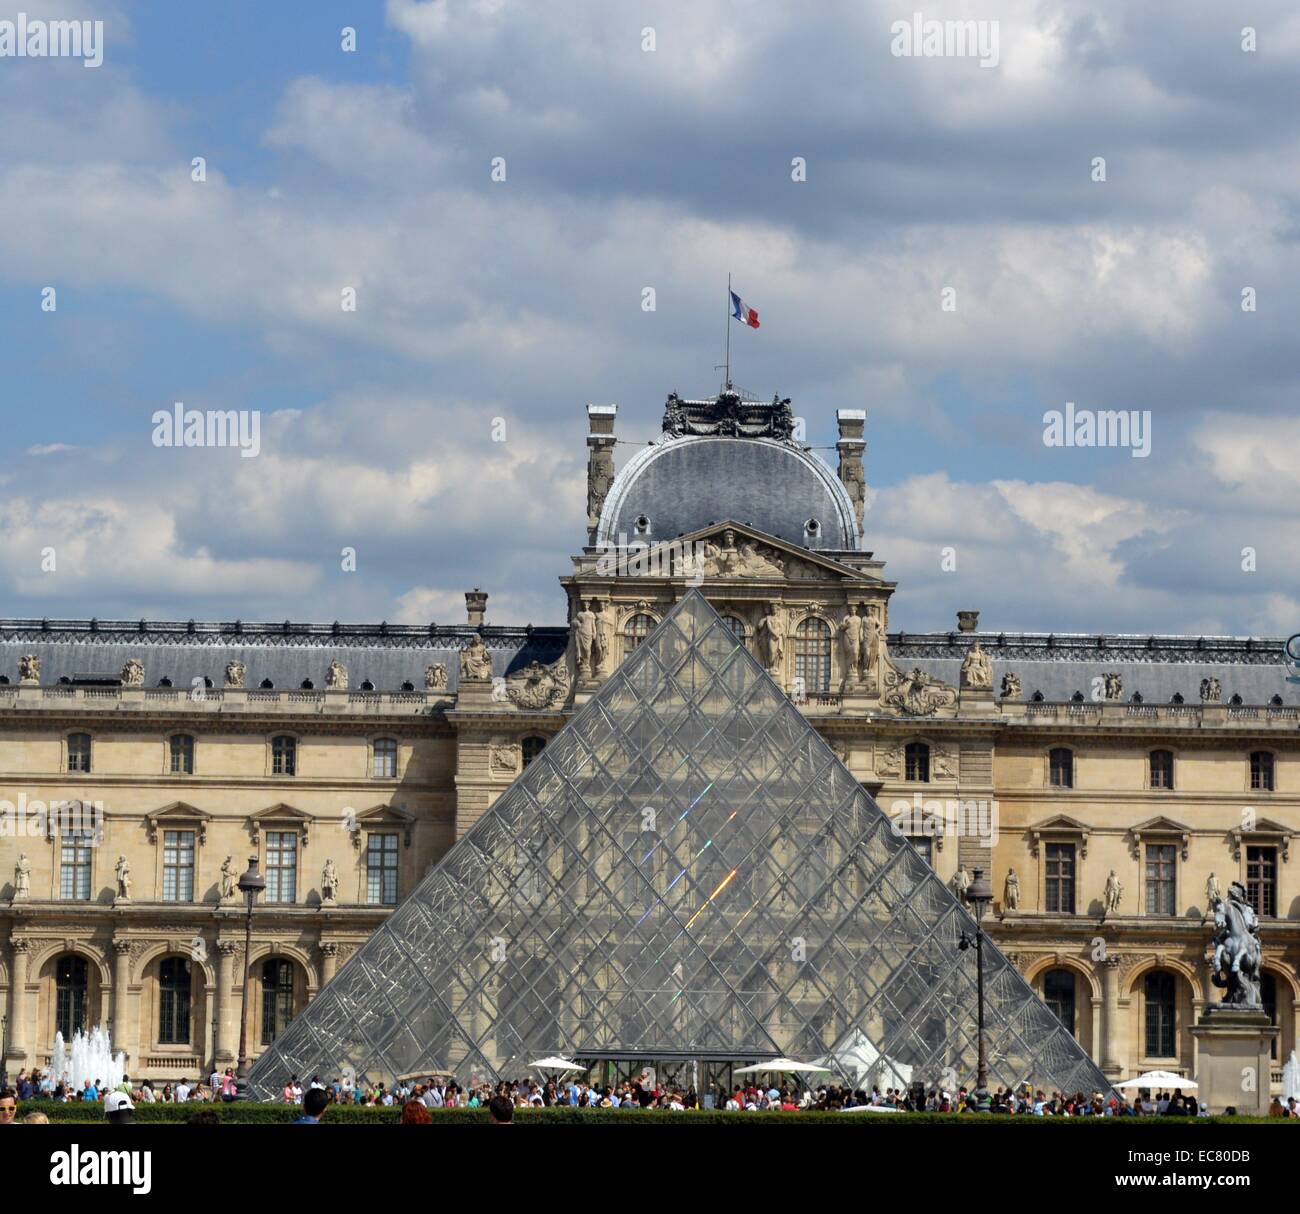 The Louvre Museum is one of the world's largest museums and a historic monument. Established 1792. The Pyramid is a large glass and metal pyramid surrounded by three smaller pyramids. Inaugurateed March 30 1989. Dated 20th century. Stock Photo